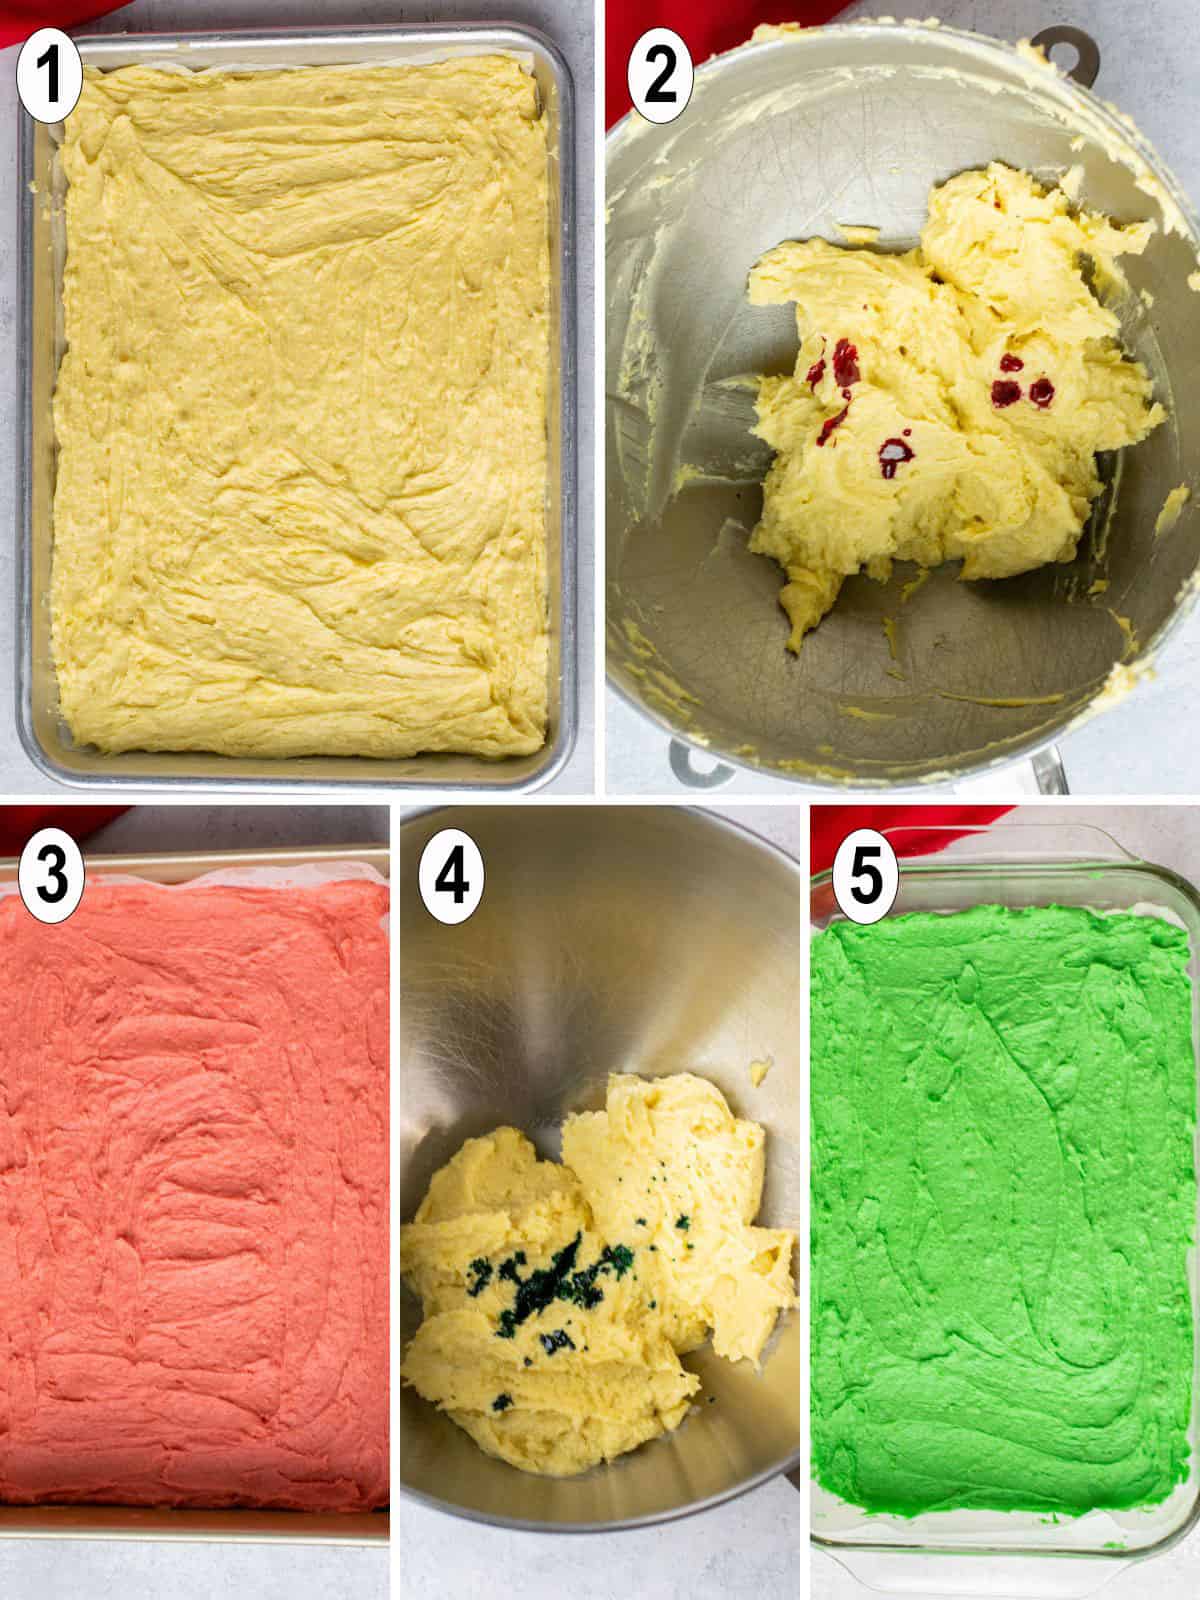 white, red and green batter made and put into separate pans